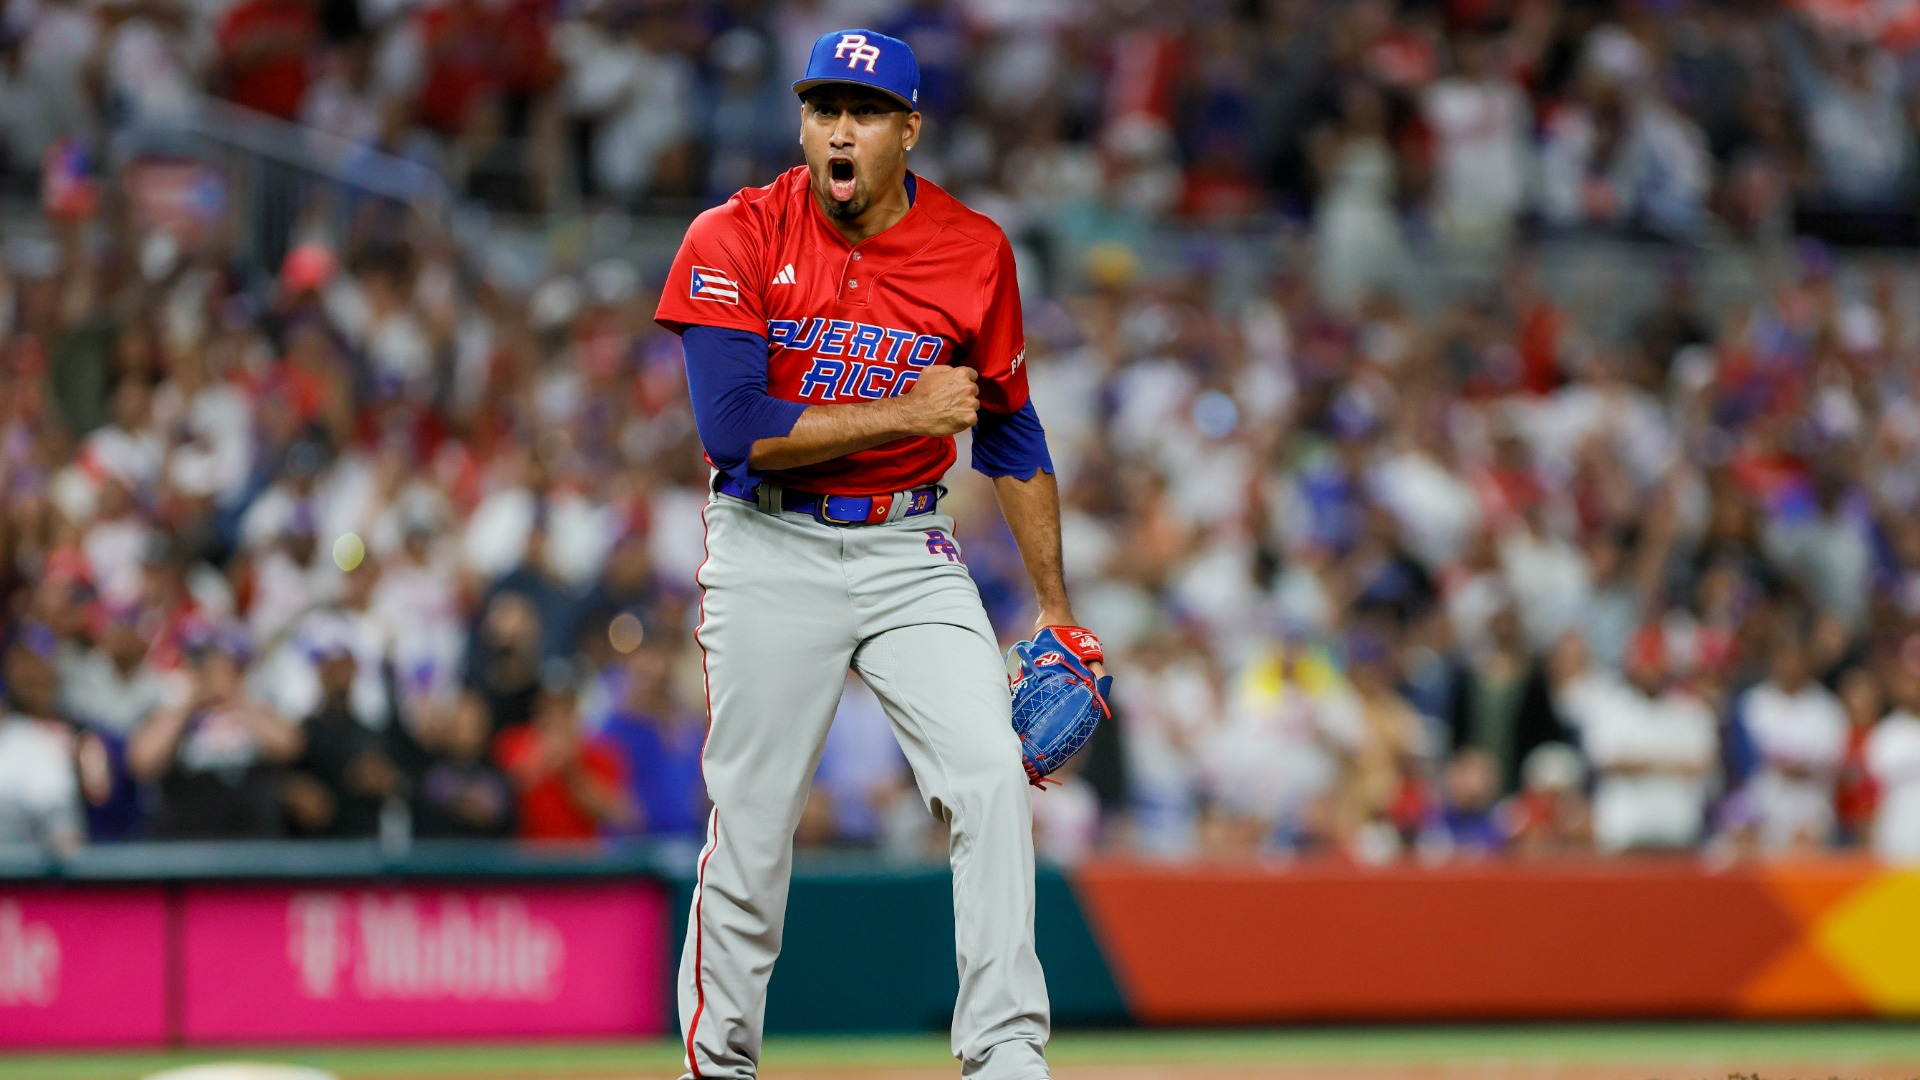 Mets' Edwin Díaz Likely Out For Season After Freak Injury In WBC